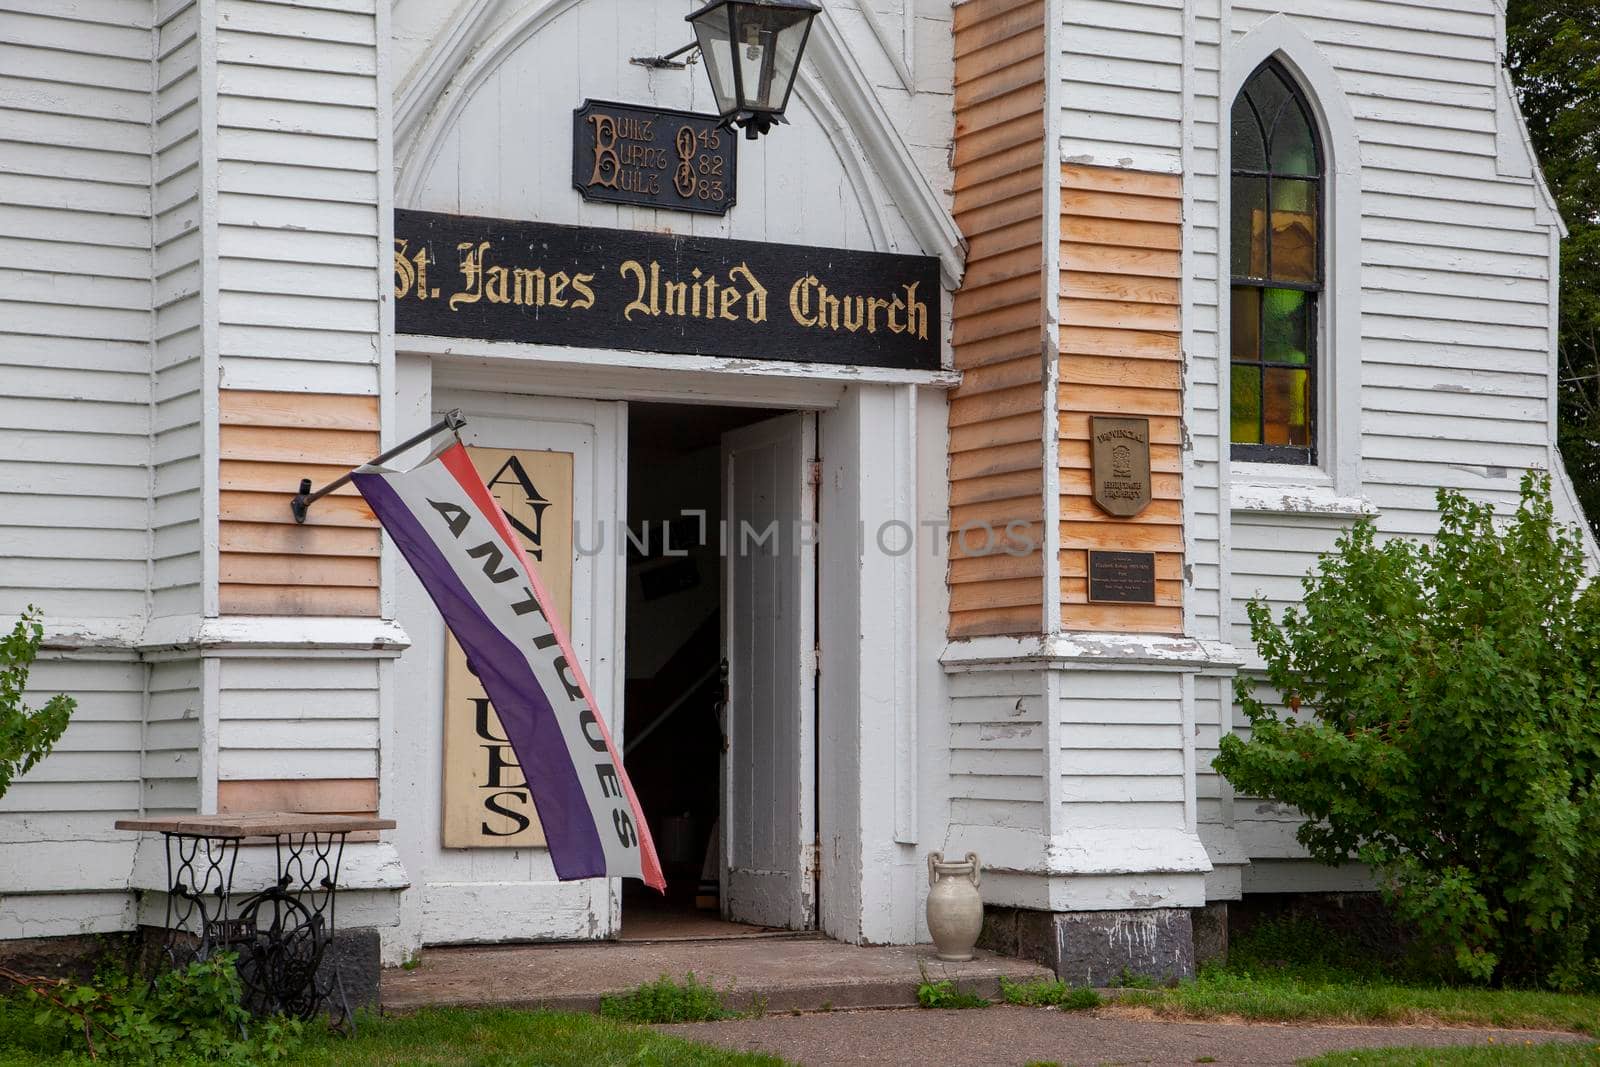 August 18, 2019 - Great Village, Nova Scotia - in the summer months the St James United church building is rented to antique sellers 